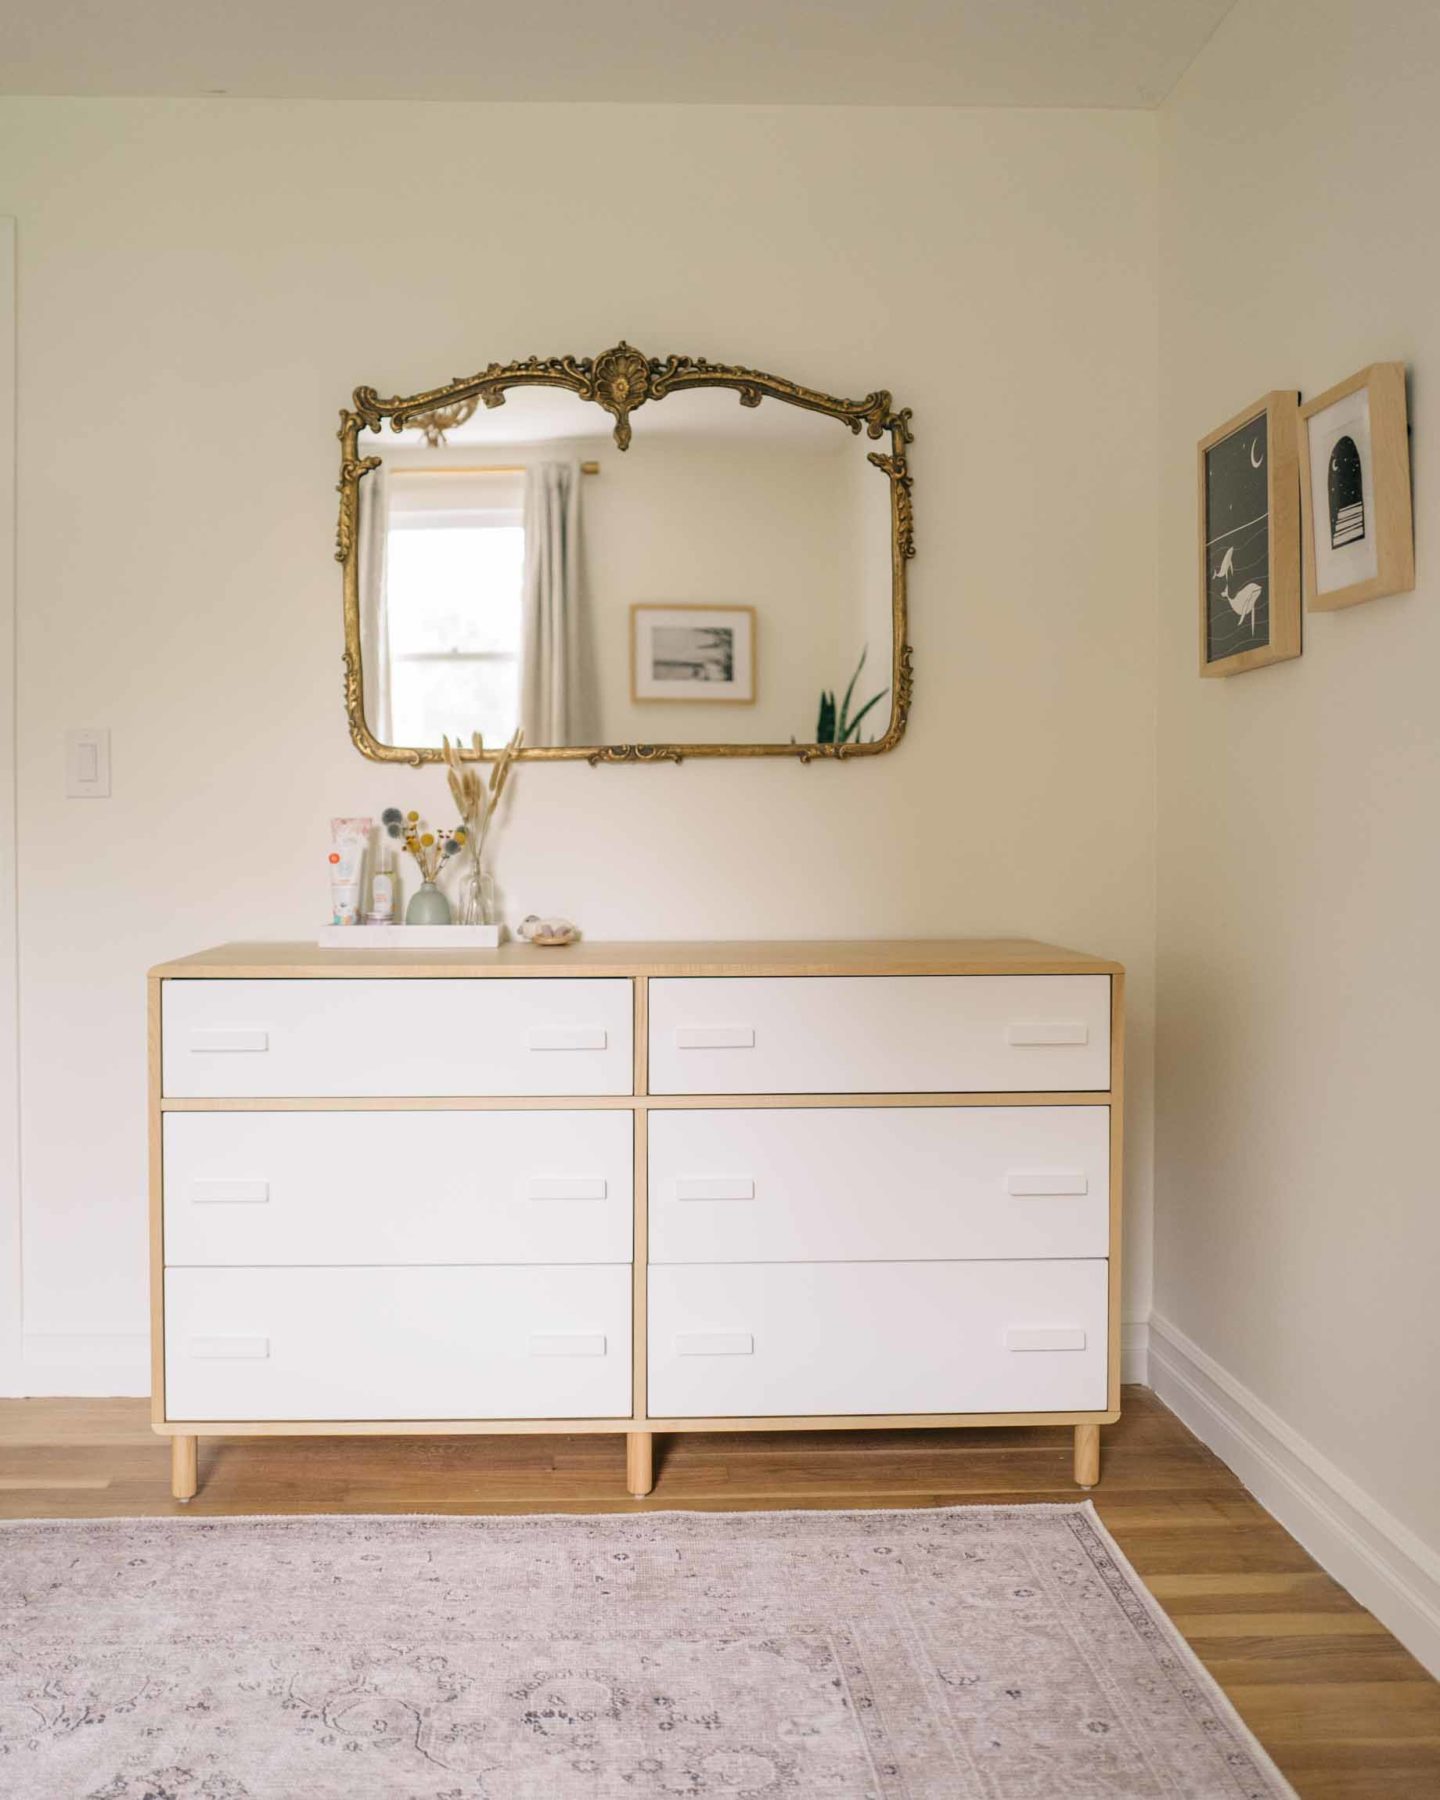 Jess Ann Kirby's gender neutral nursery has sweet details, like a brass mirror and illustrations, for her baby.